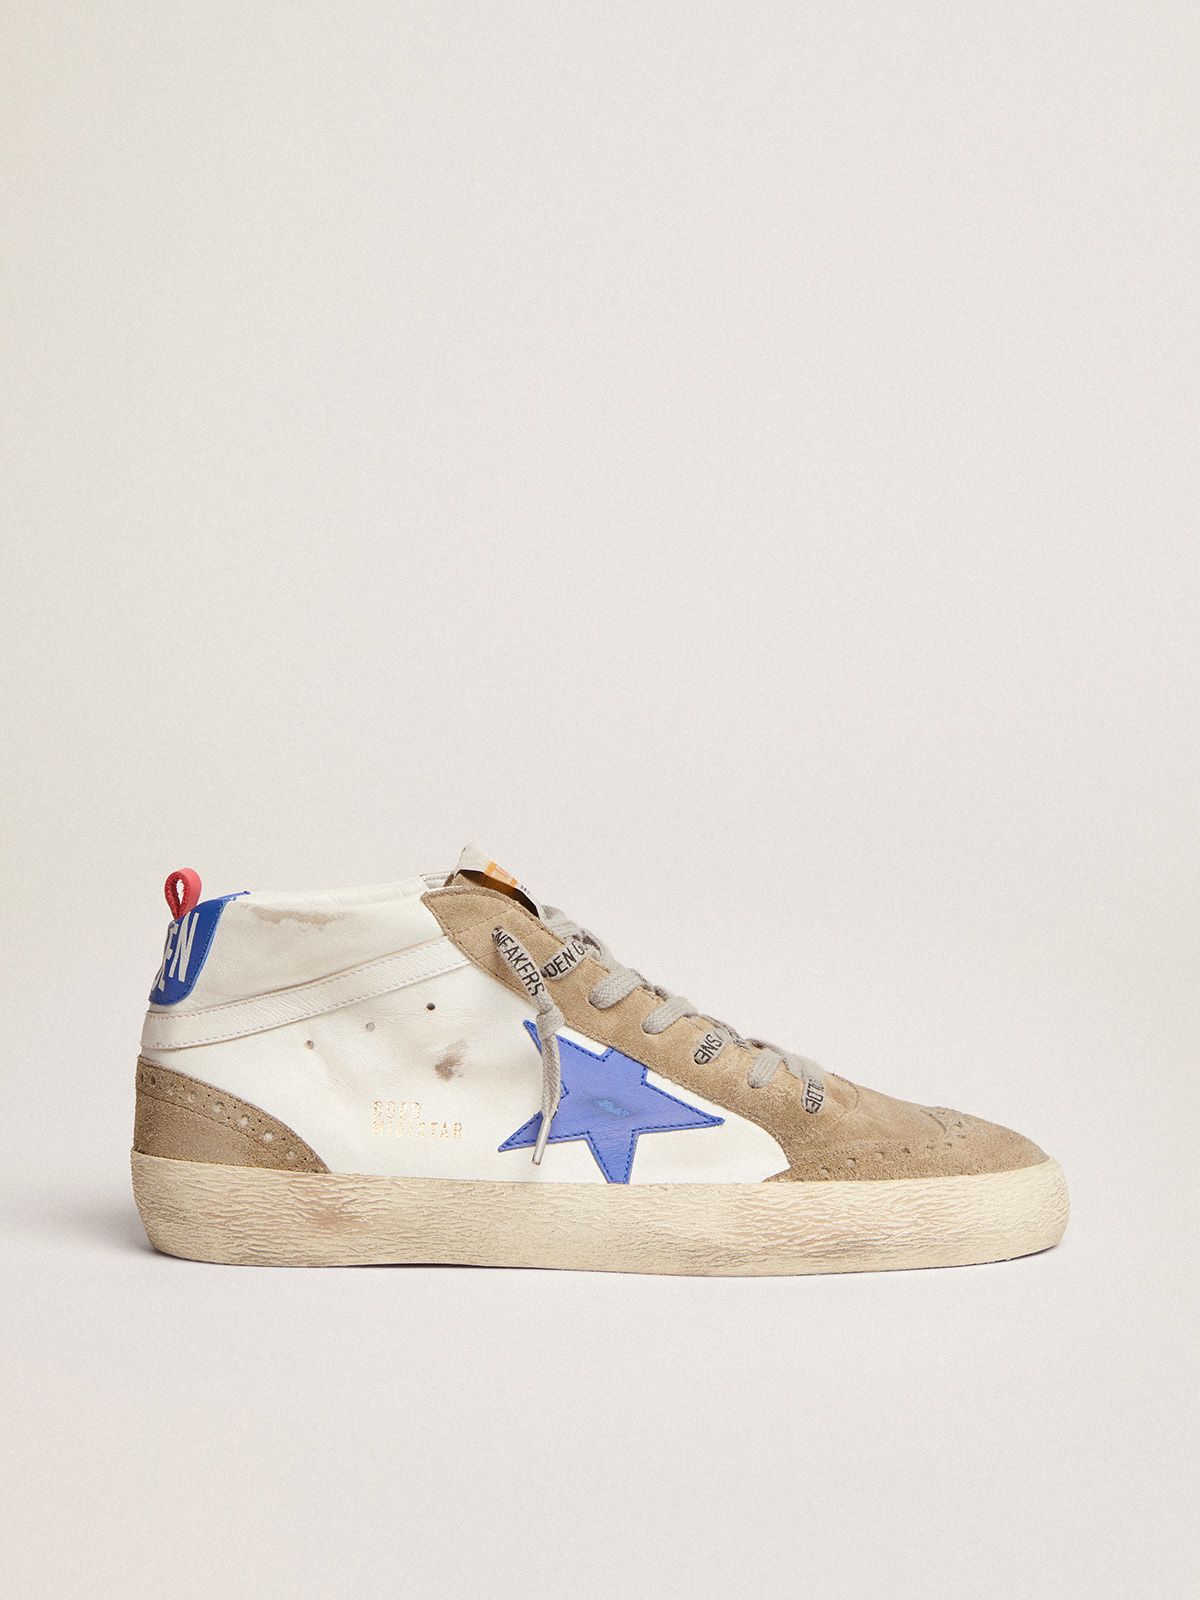 Golden Goose Sconto Uomo Mid Star sneakers in white leather with blue leather star and dove-gray suede inserts